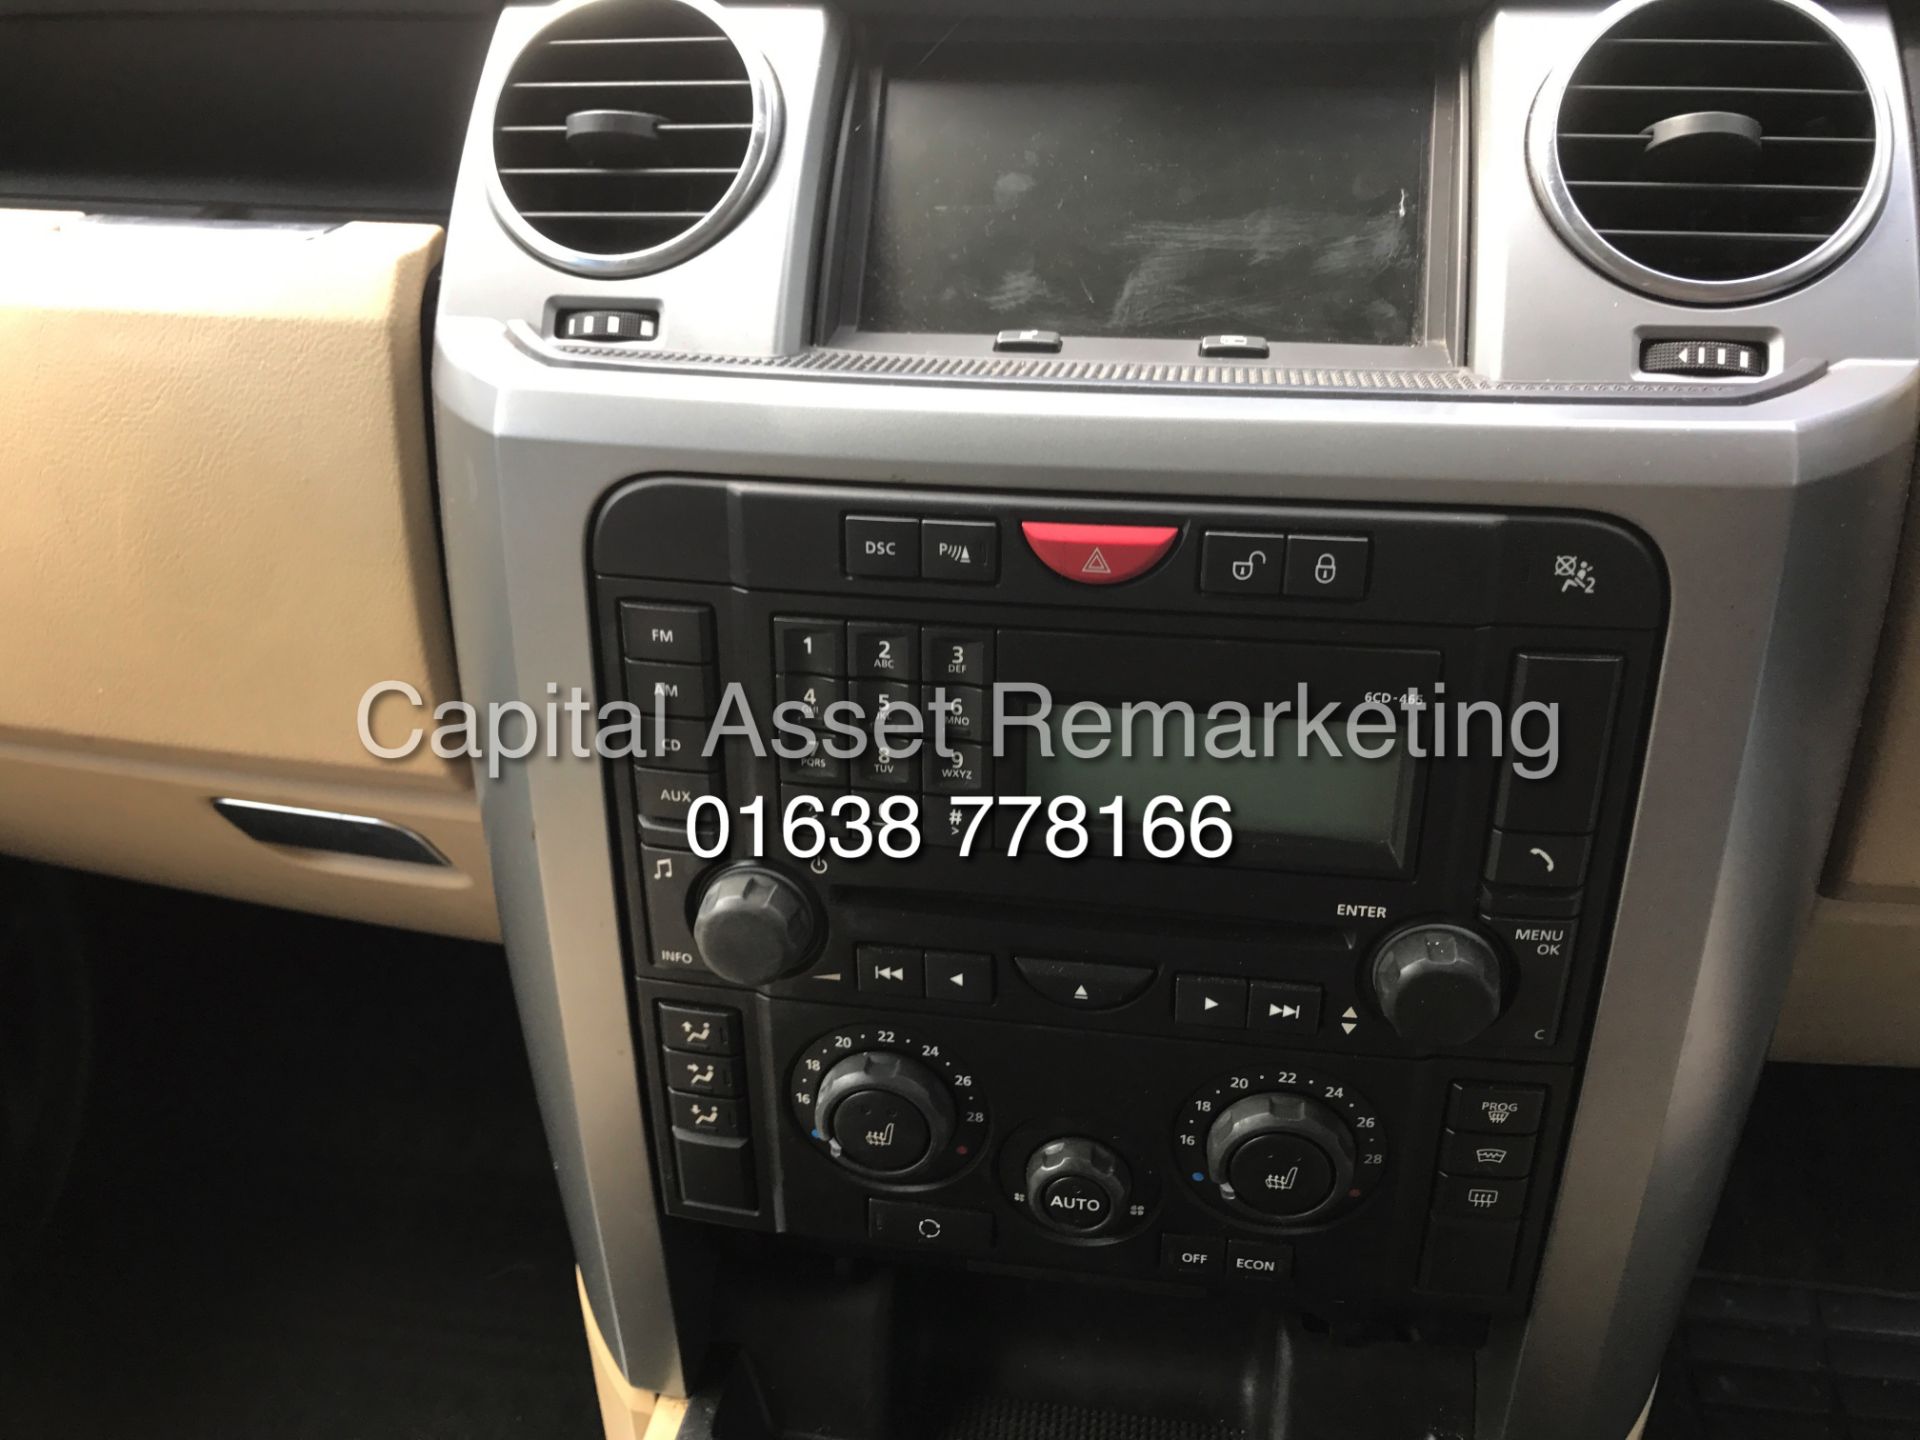 (ON SALE) LANDROVER DISCOVERY 3 "TDV6 "HSE" AUTOMATIC (08 REG) BLACK - FSH - LEATHER - SAT NAV - - Image 11 of 16